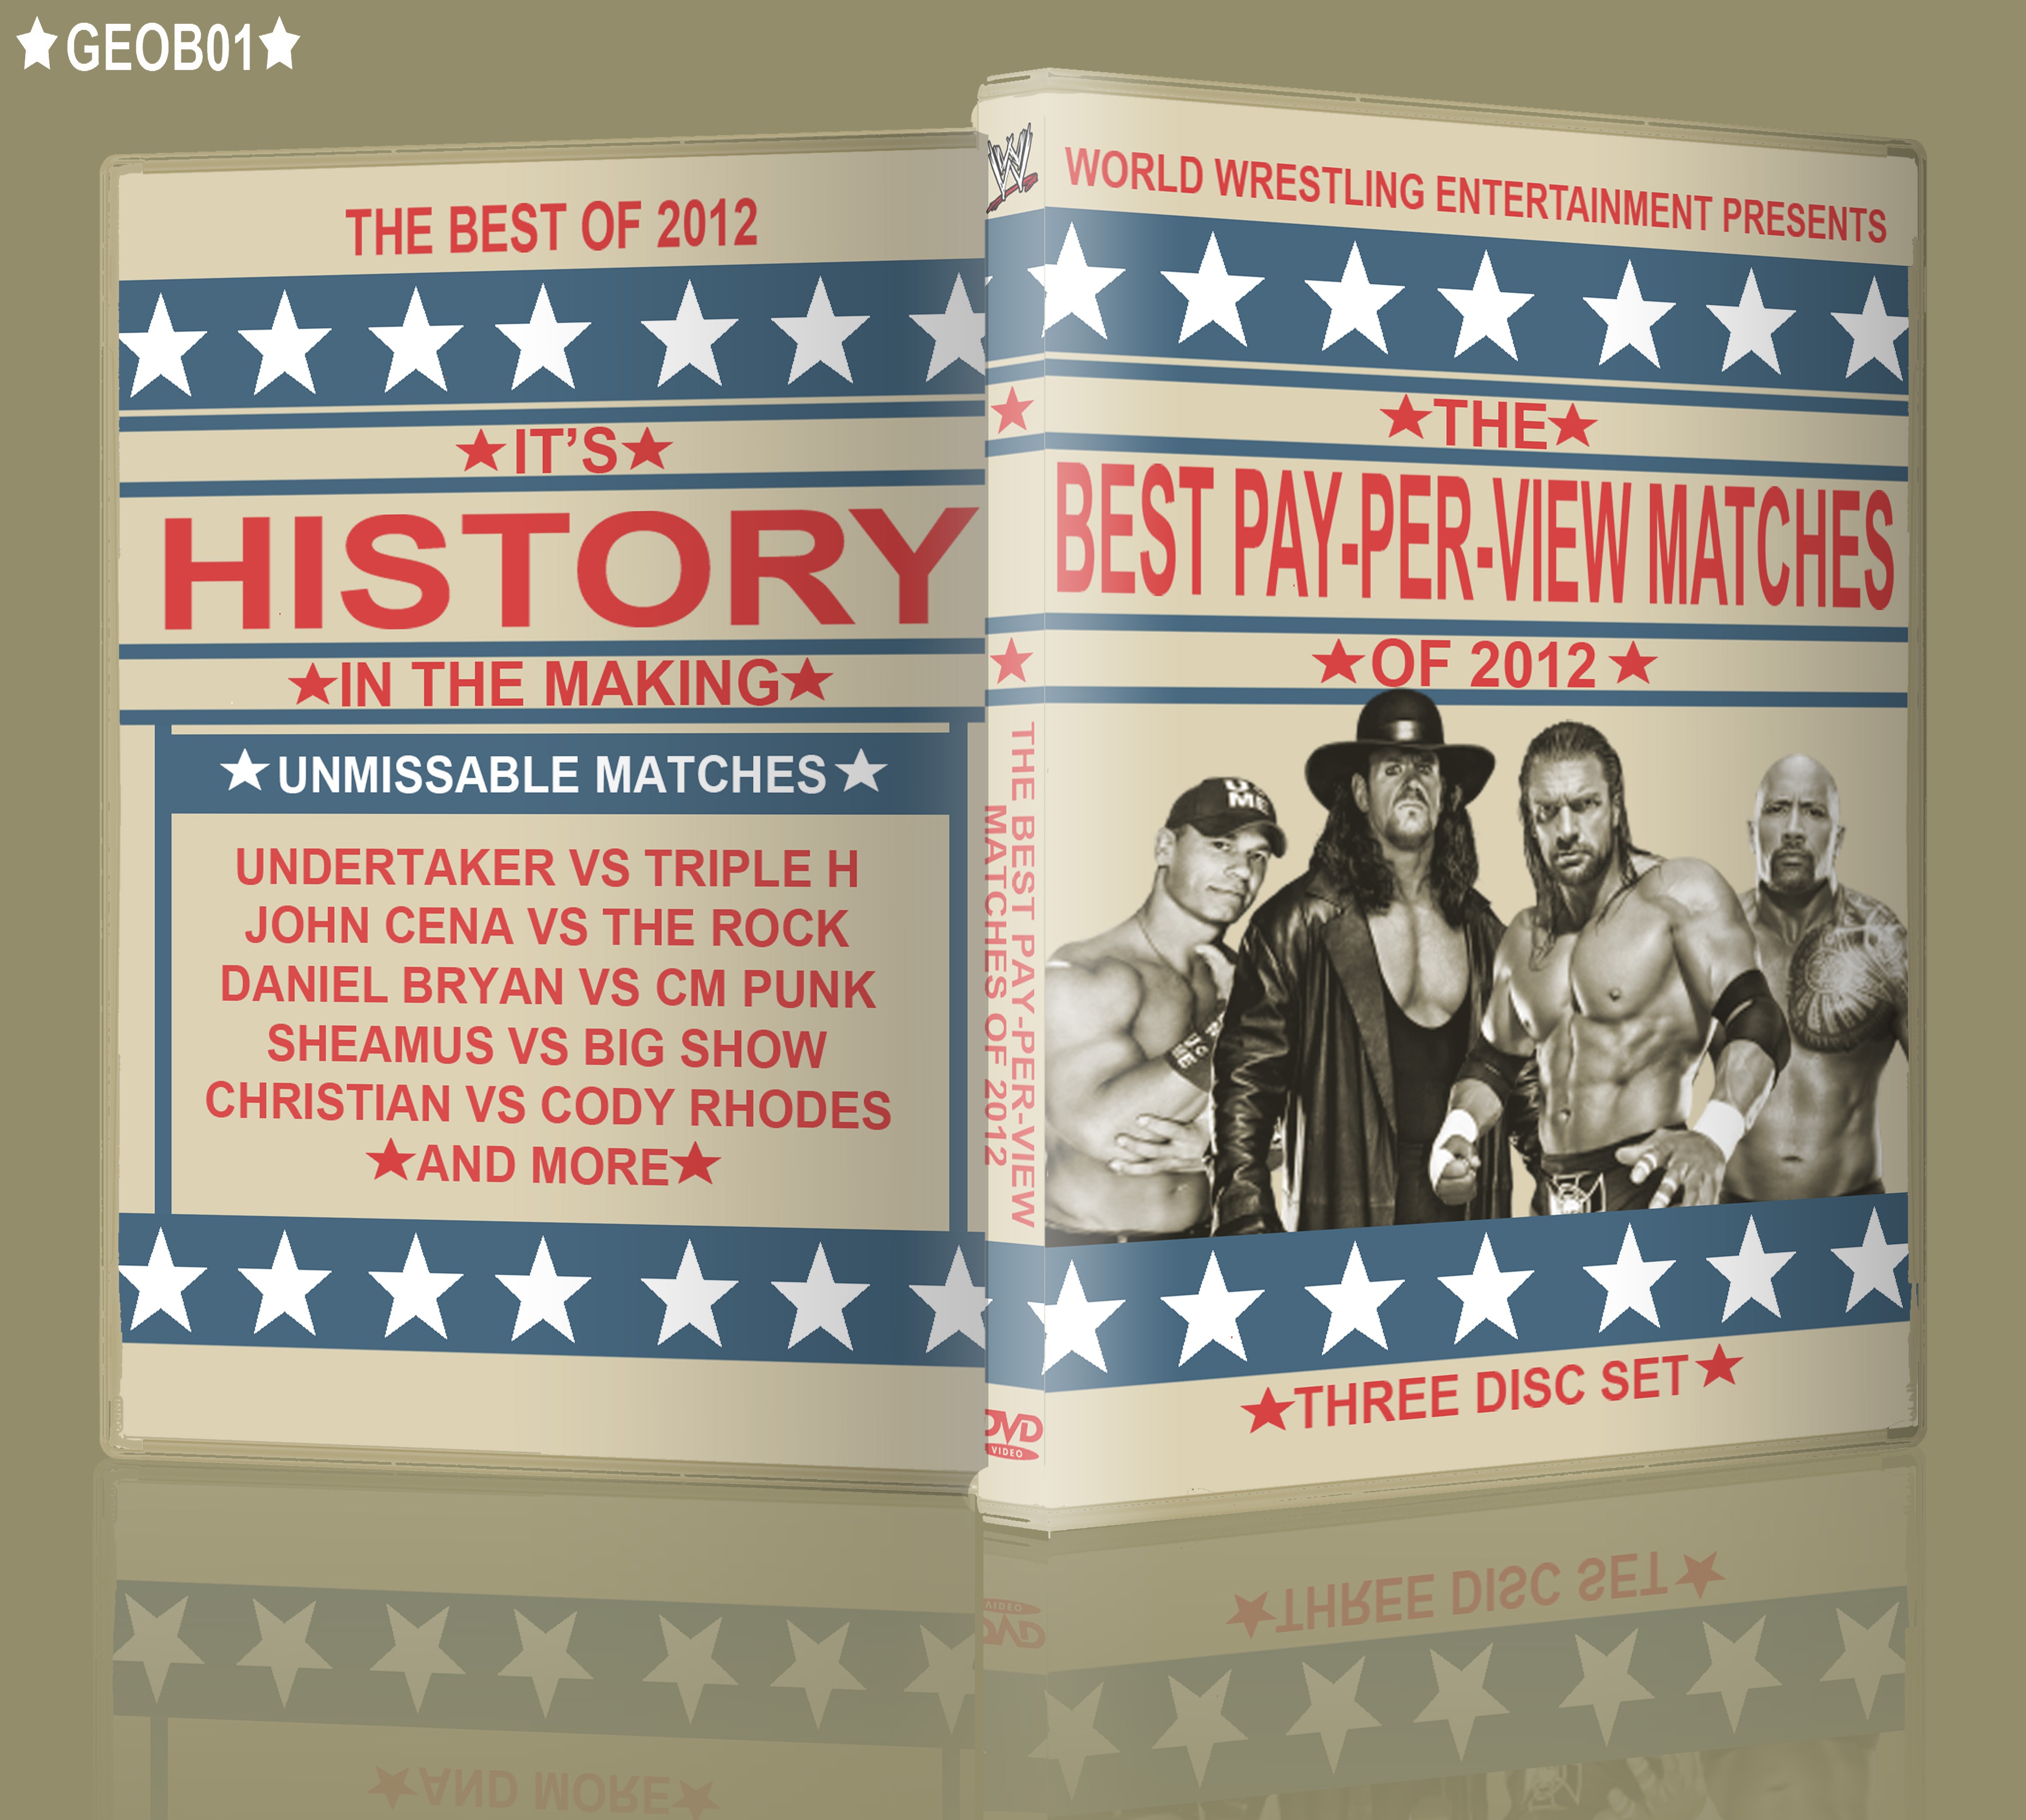 The Best PPV Matches Of 2012 box cover